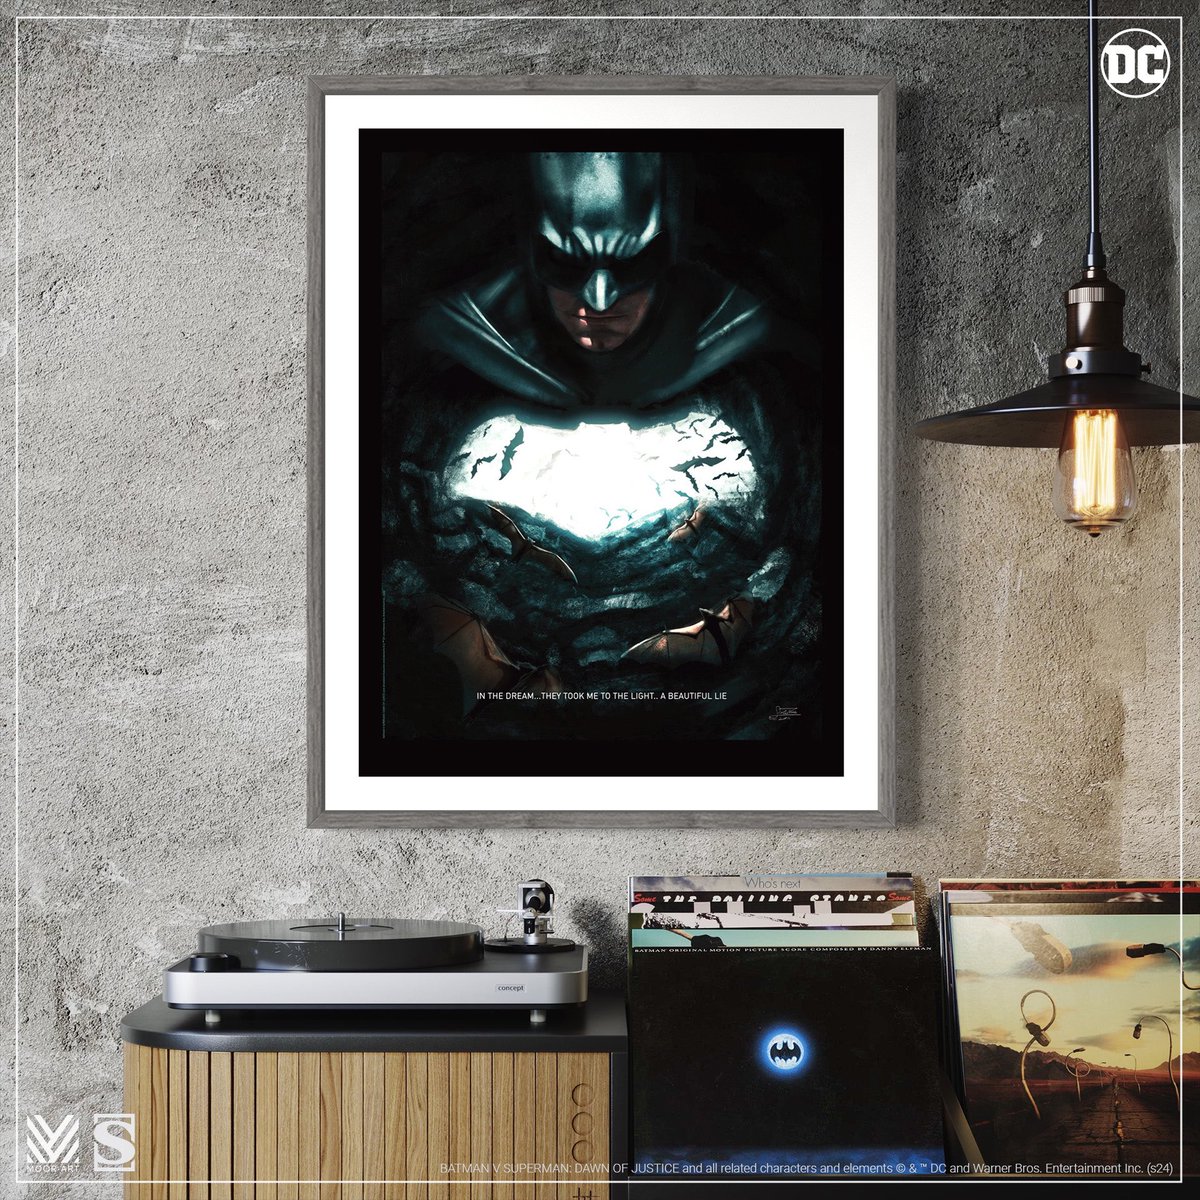 ON SALE NOW. Officially licensed museum-grade Art Print. Limited, hand numbered with embossed CoA. At moorartgallery.com #🎨 by @RedMarker2611 FREE UK SHIPPING. DOMESTIC USA RATES. Licensed and released in collaboration with Sideshow. #batman #batmanart